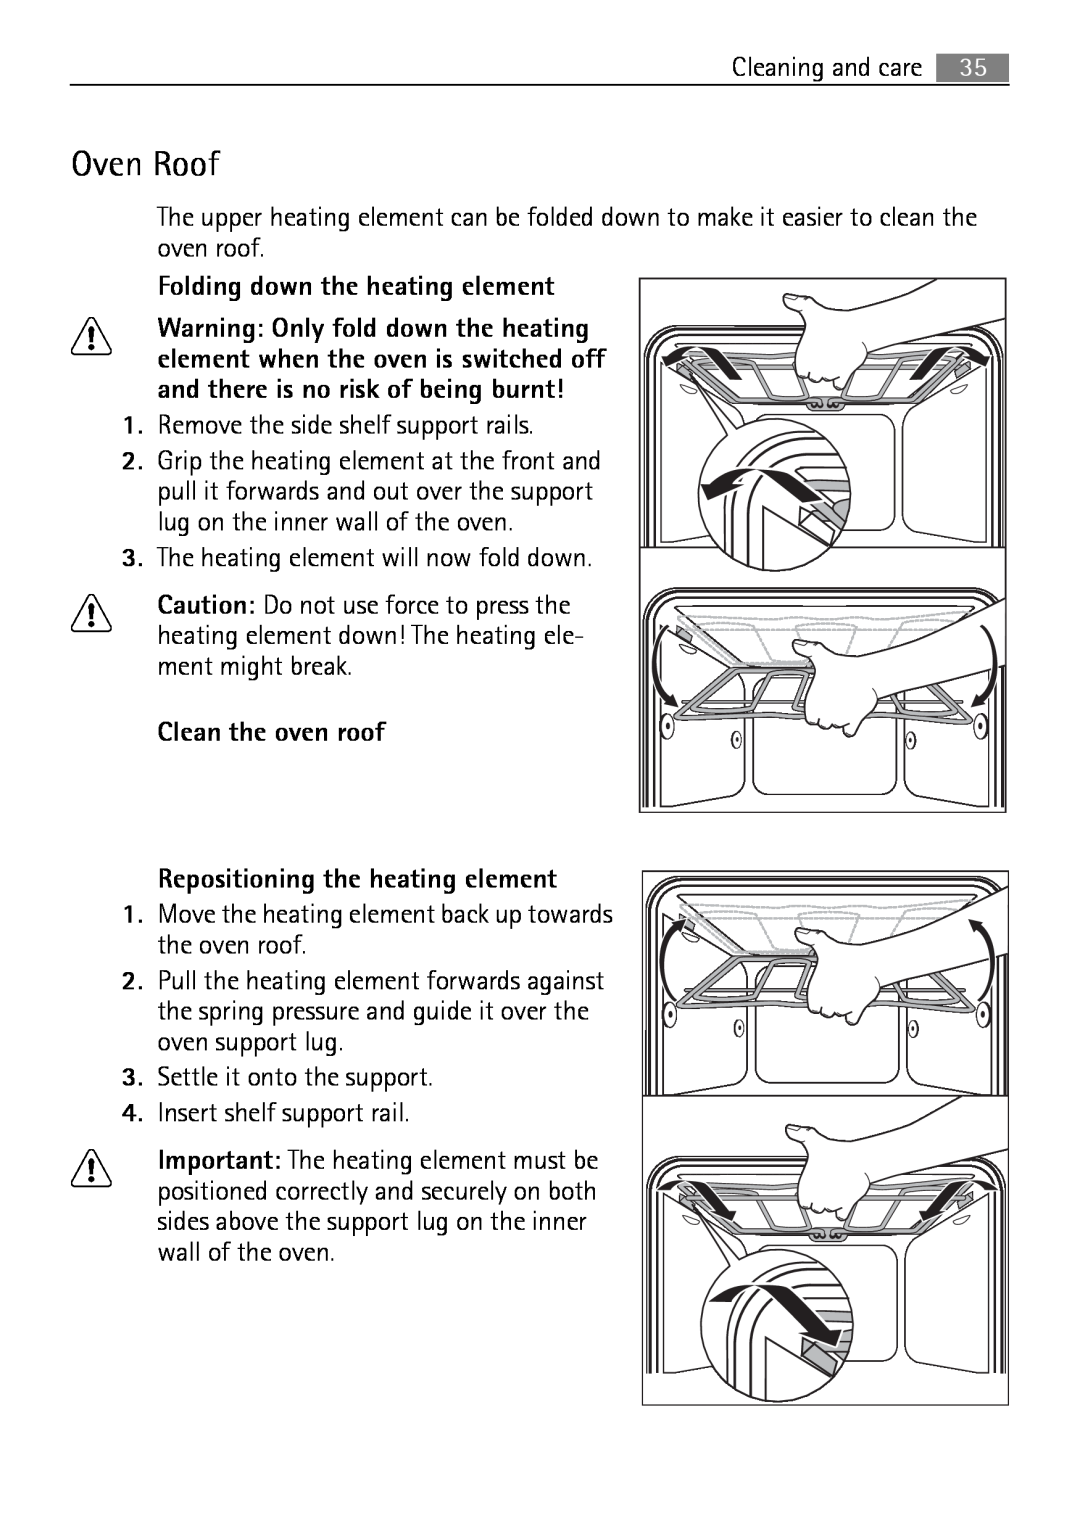 Electrolux B2100-5 user manual Oven Roof, Folding down the heating element 1 Warning Only fold down the heating 